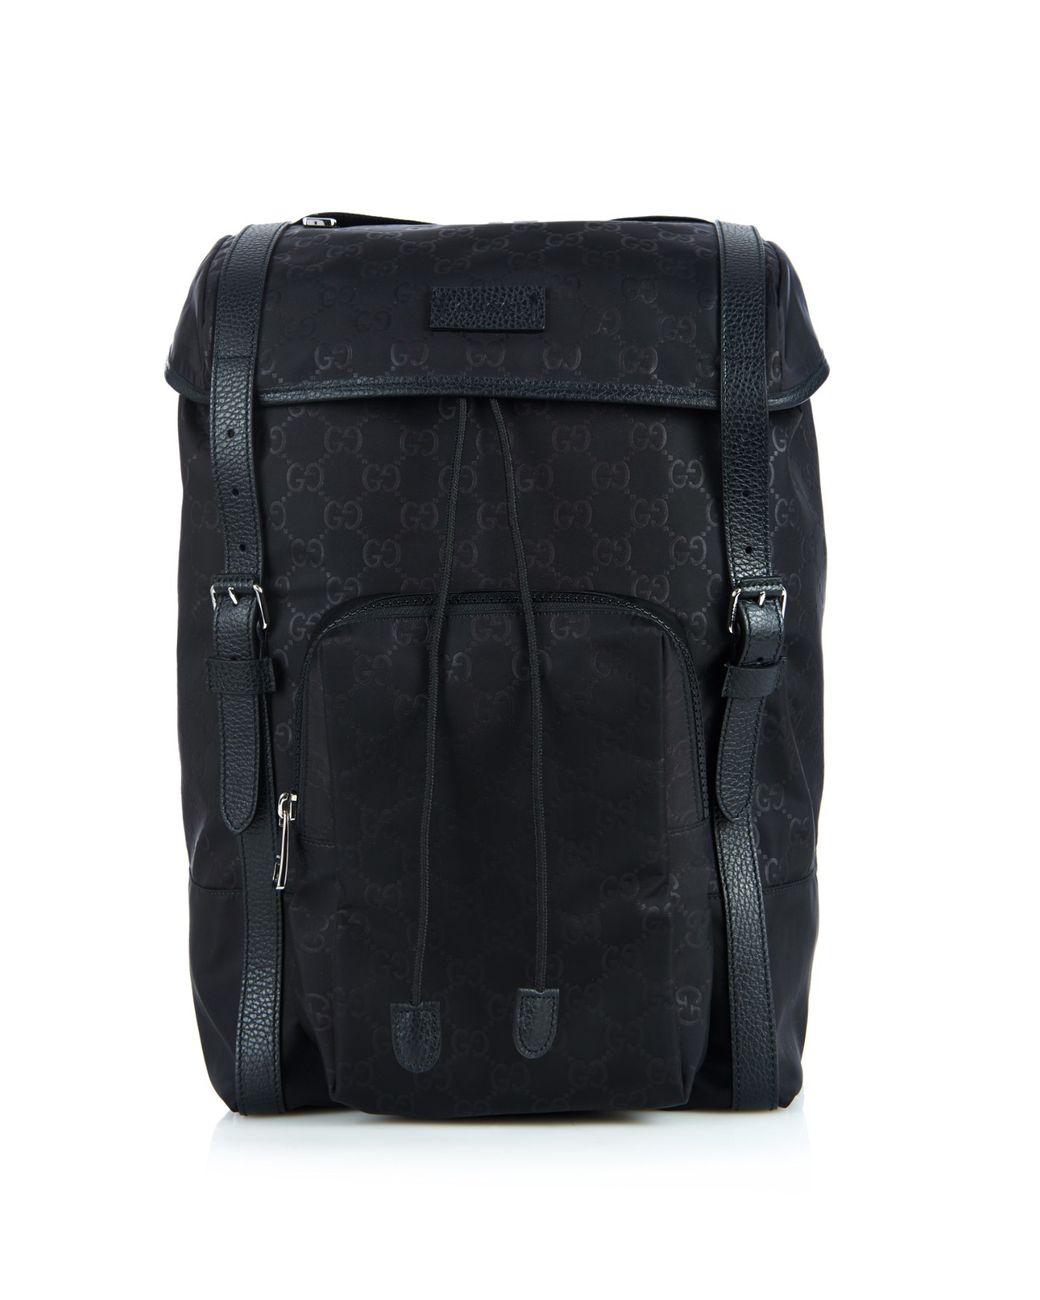 Gucci Gg Nylon Backpack From The Viaggio Collection, $420, Gucci